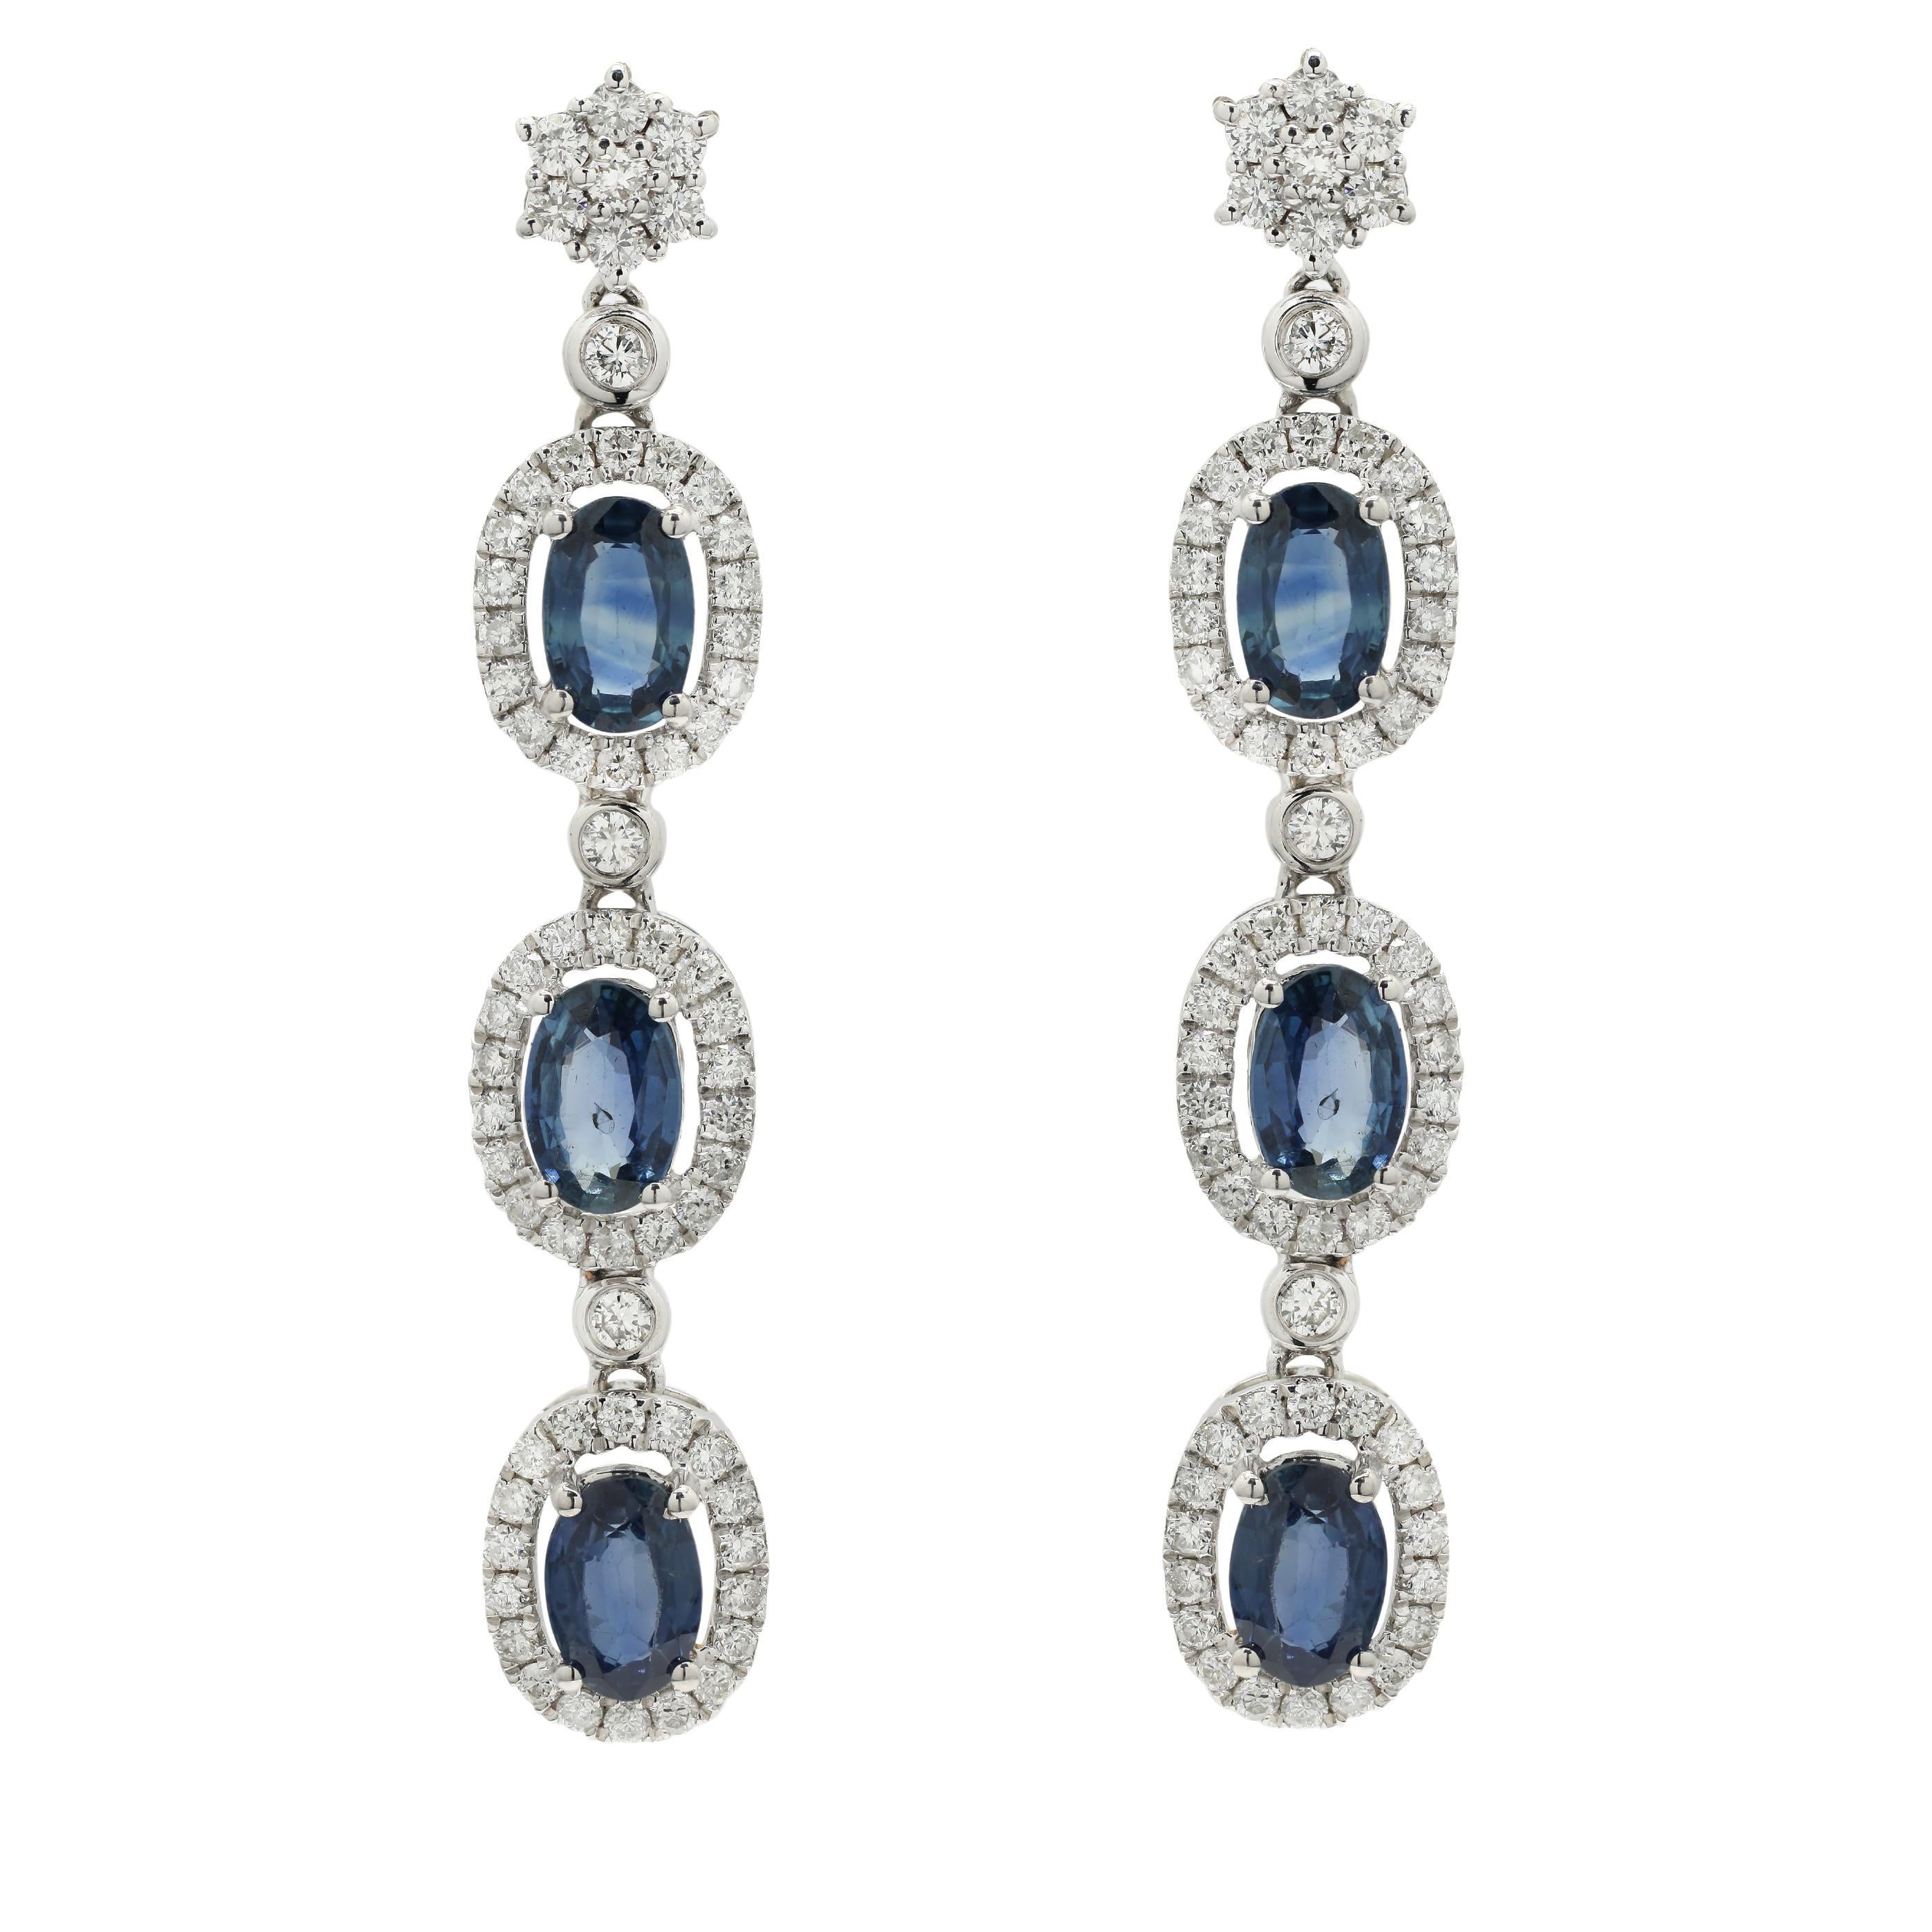 14K White Gold Long Dangle Earrings with 3.31 Ct Blue Sapphire and Diamonds